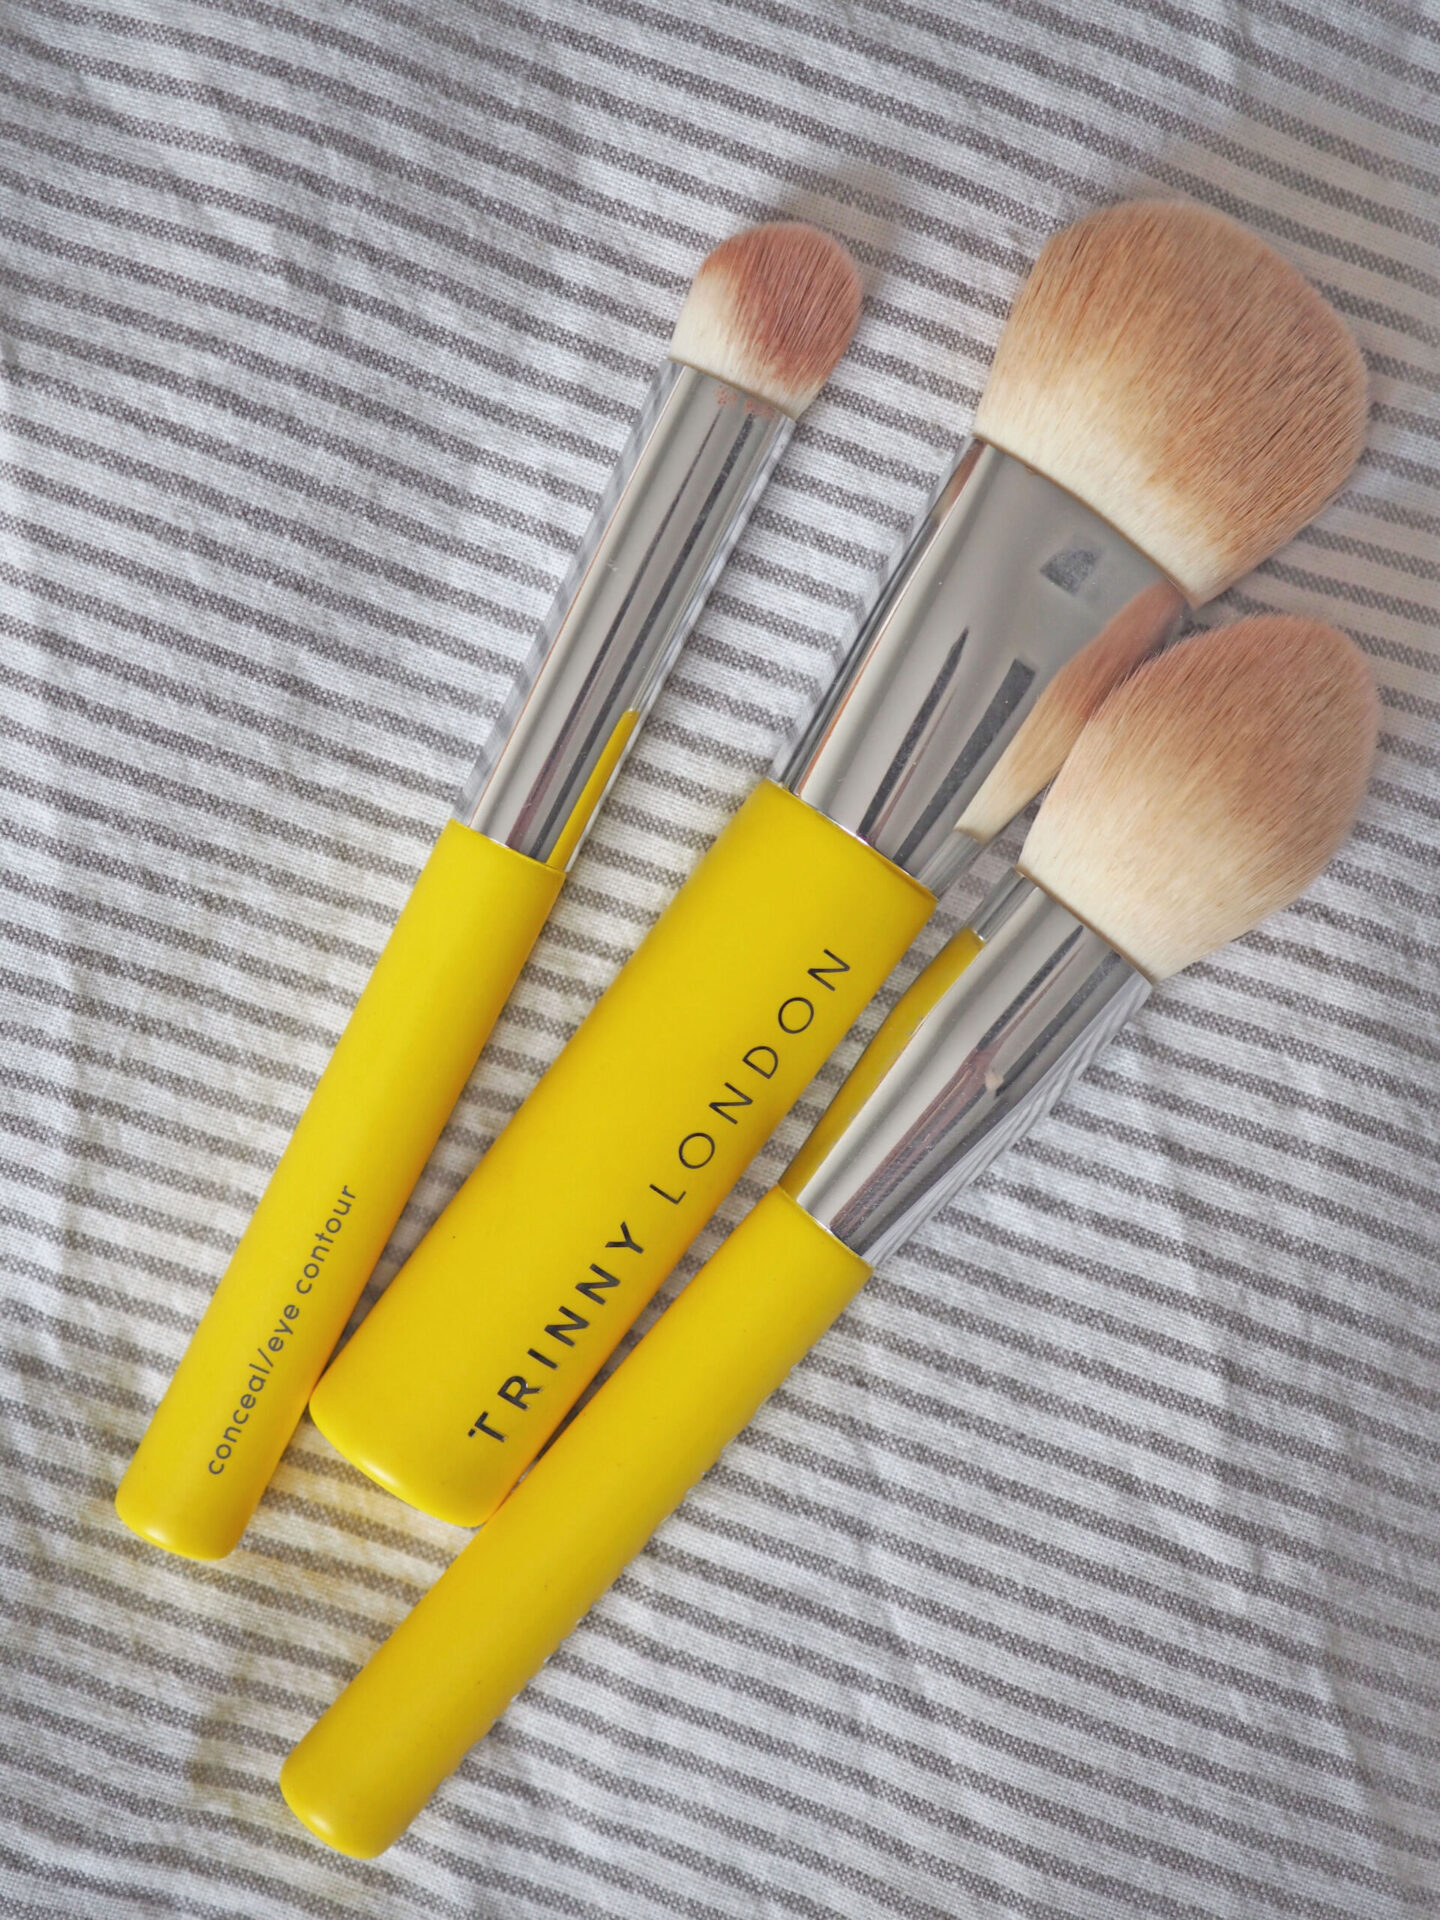 trinny London makeup brushes review